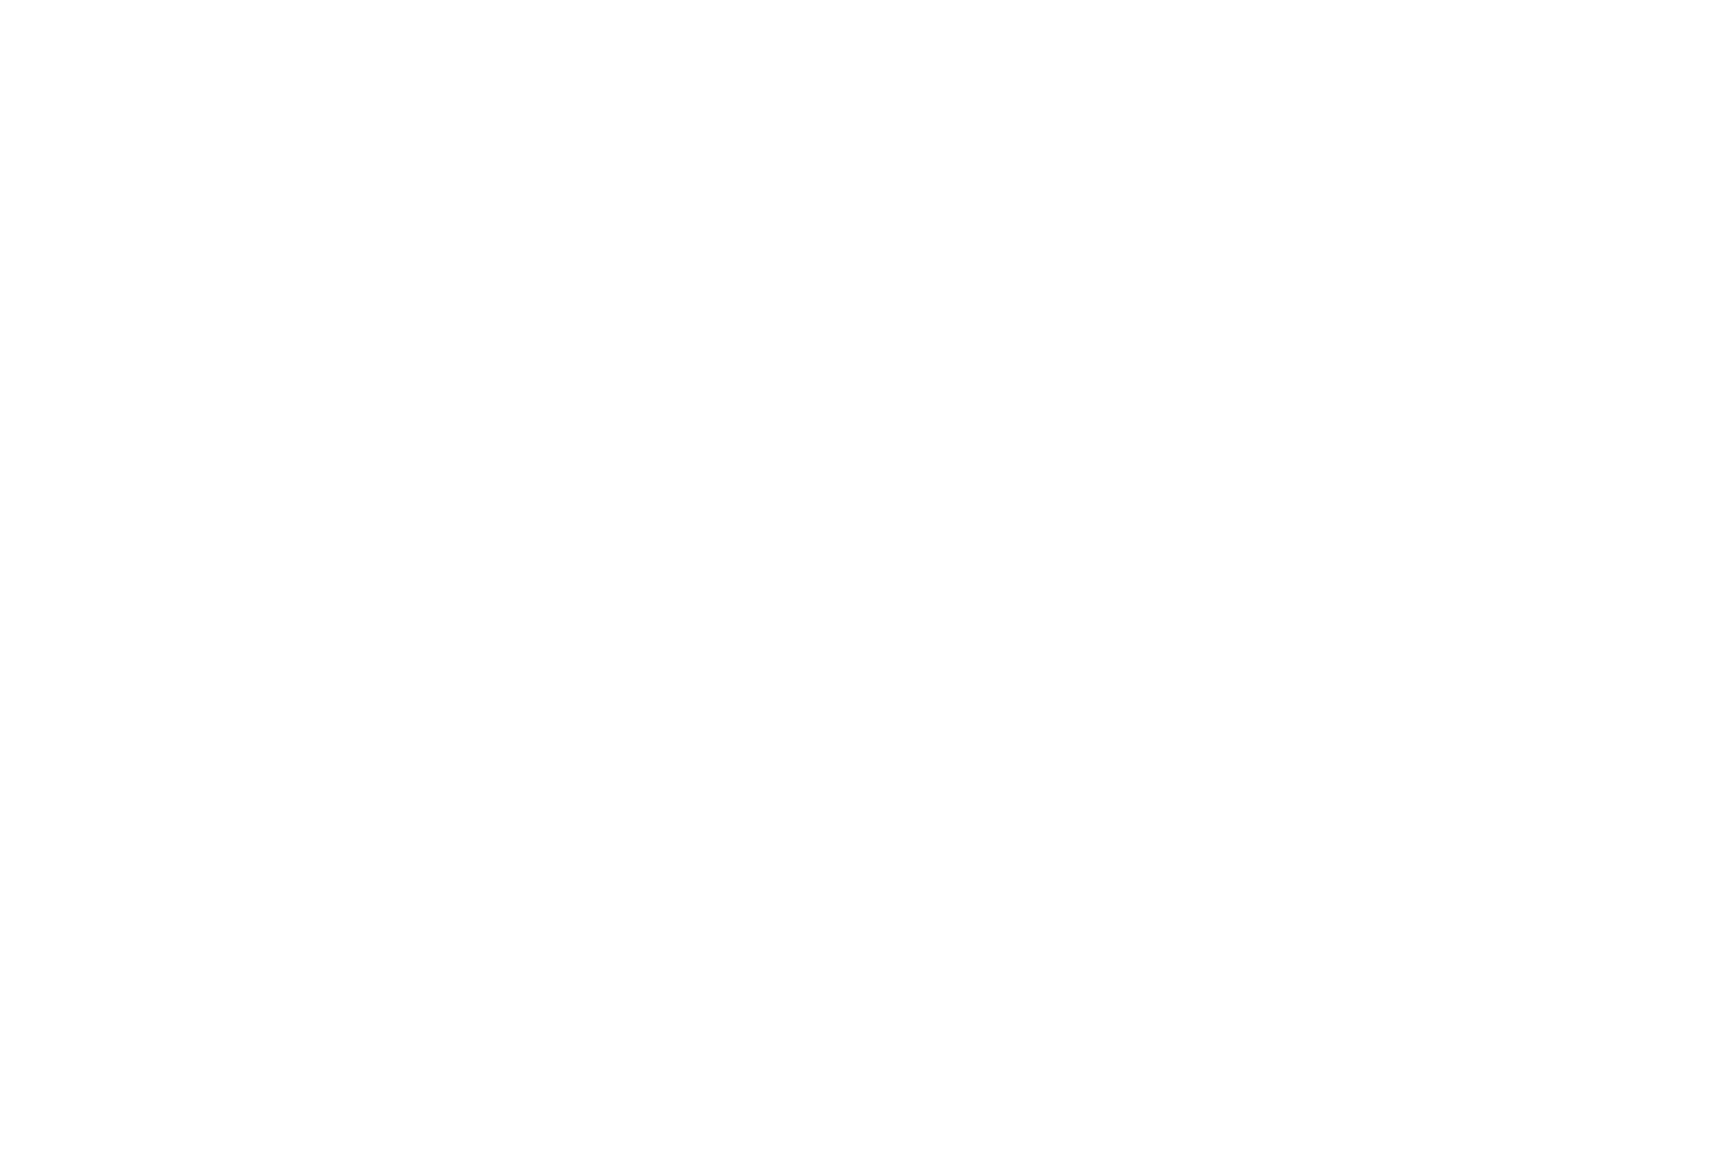 NOMINATED  - FILM OF THE MONTH  - TMFF 2016 (1).png